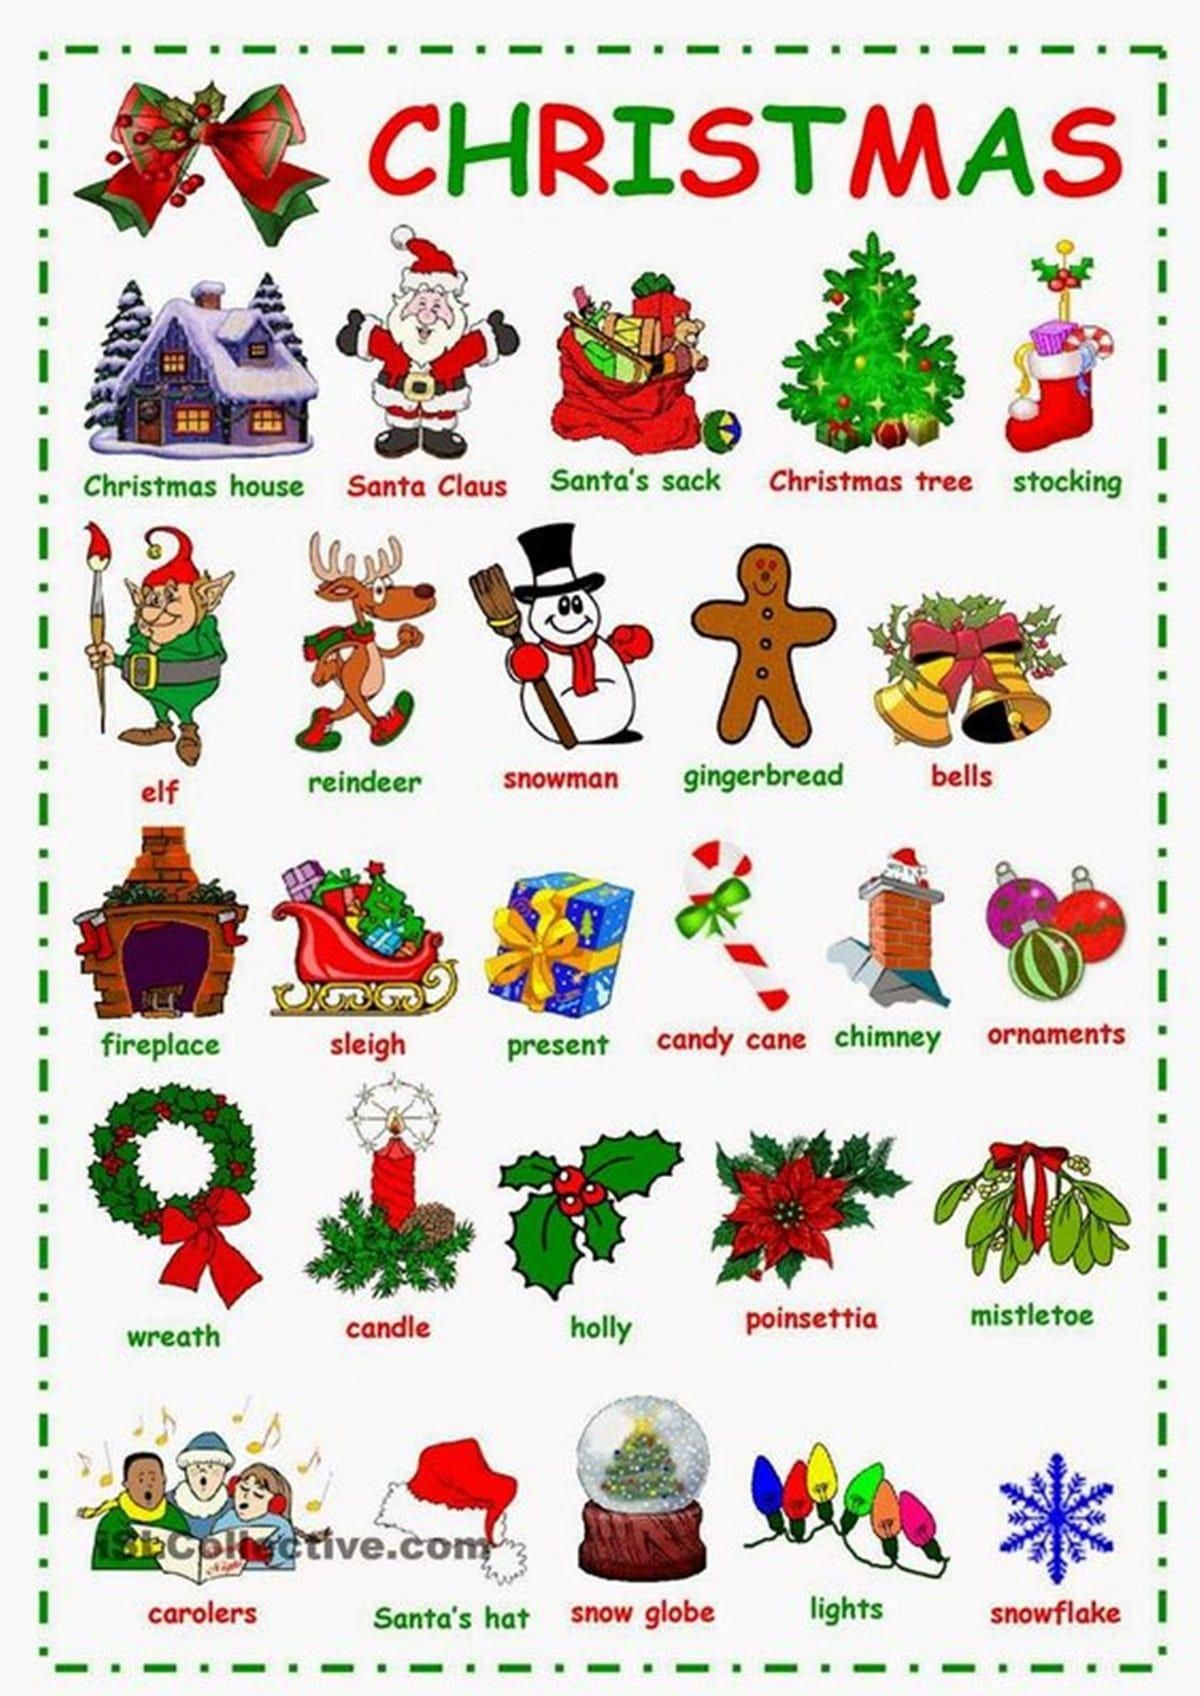 Holidays And Special Events Vocabulary In English - Eslbuzz